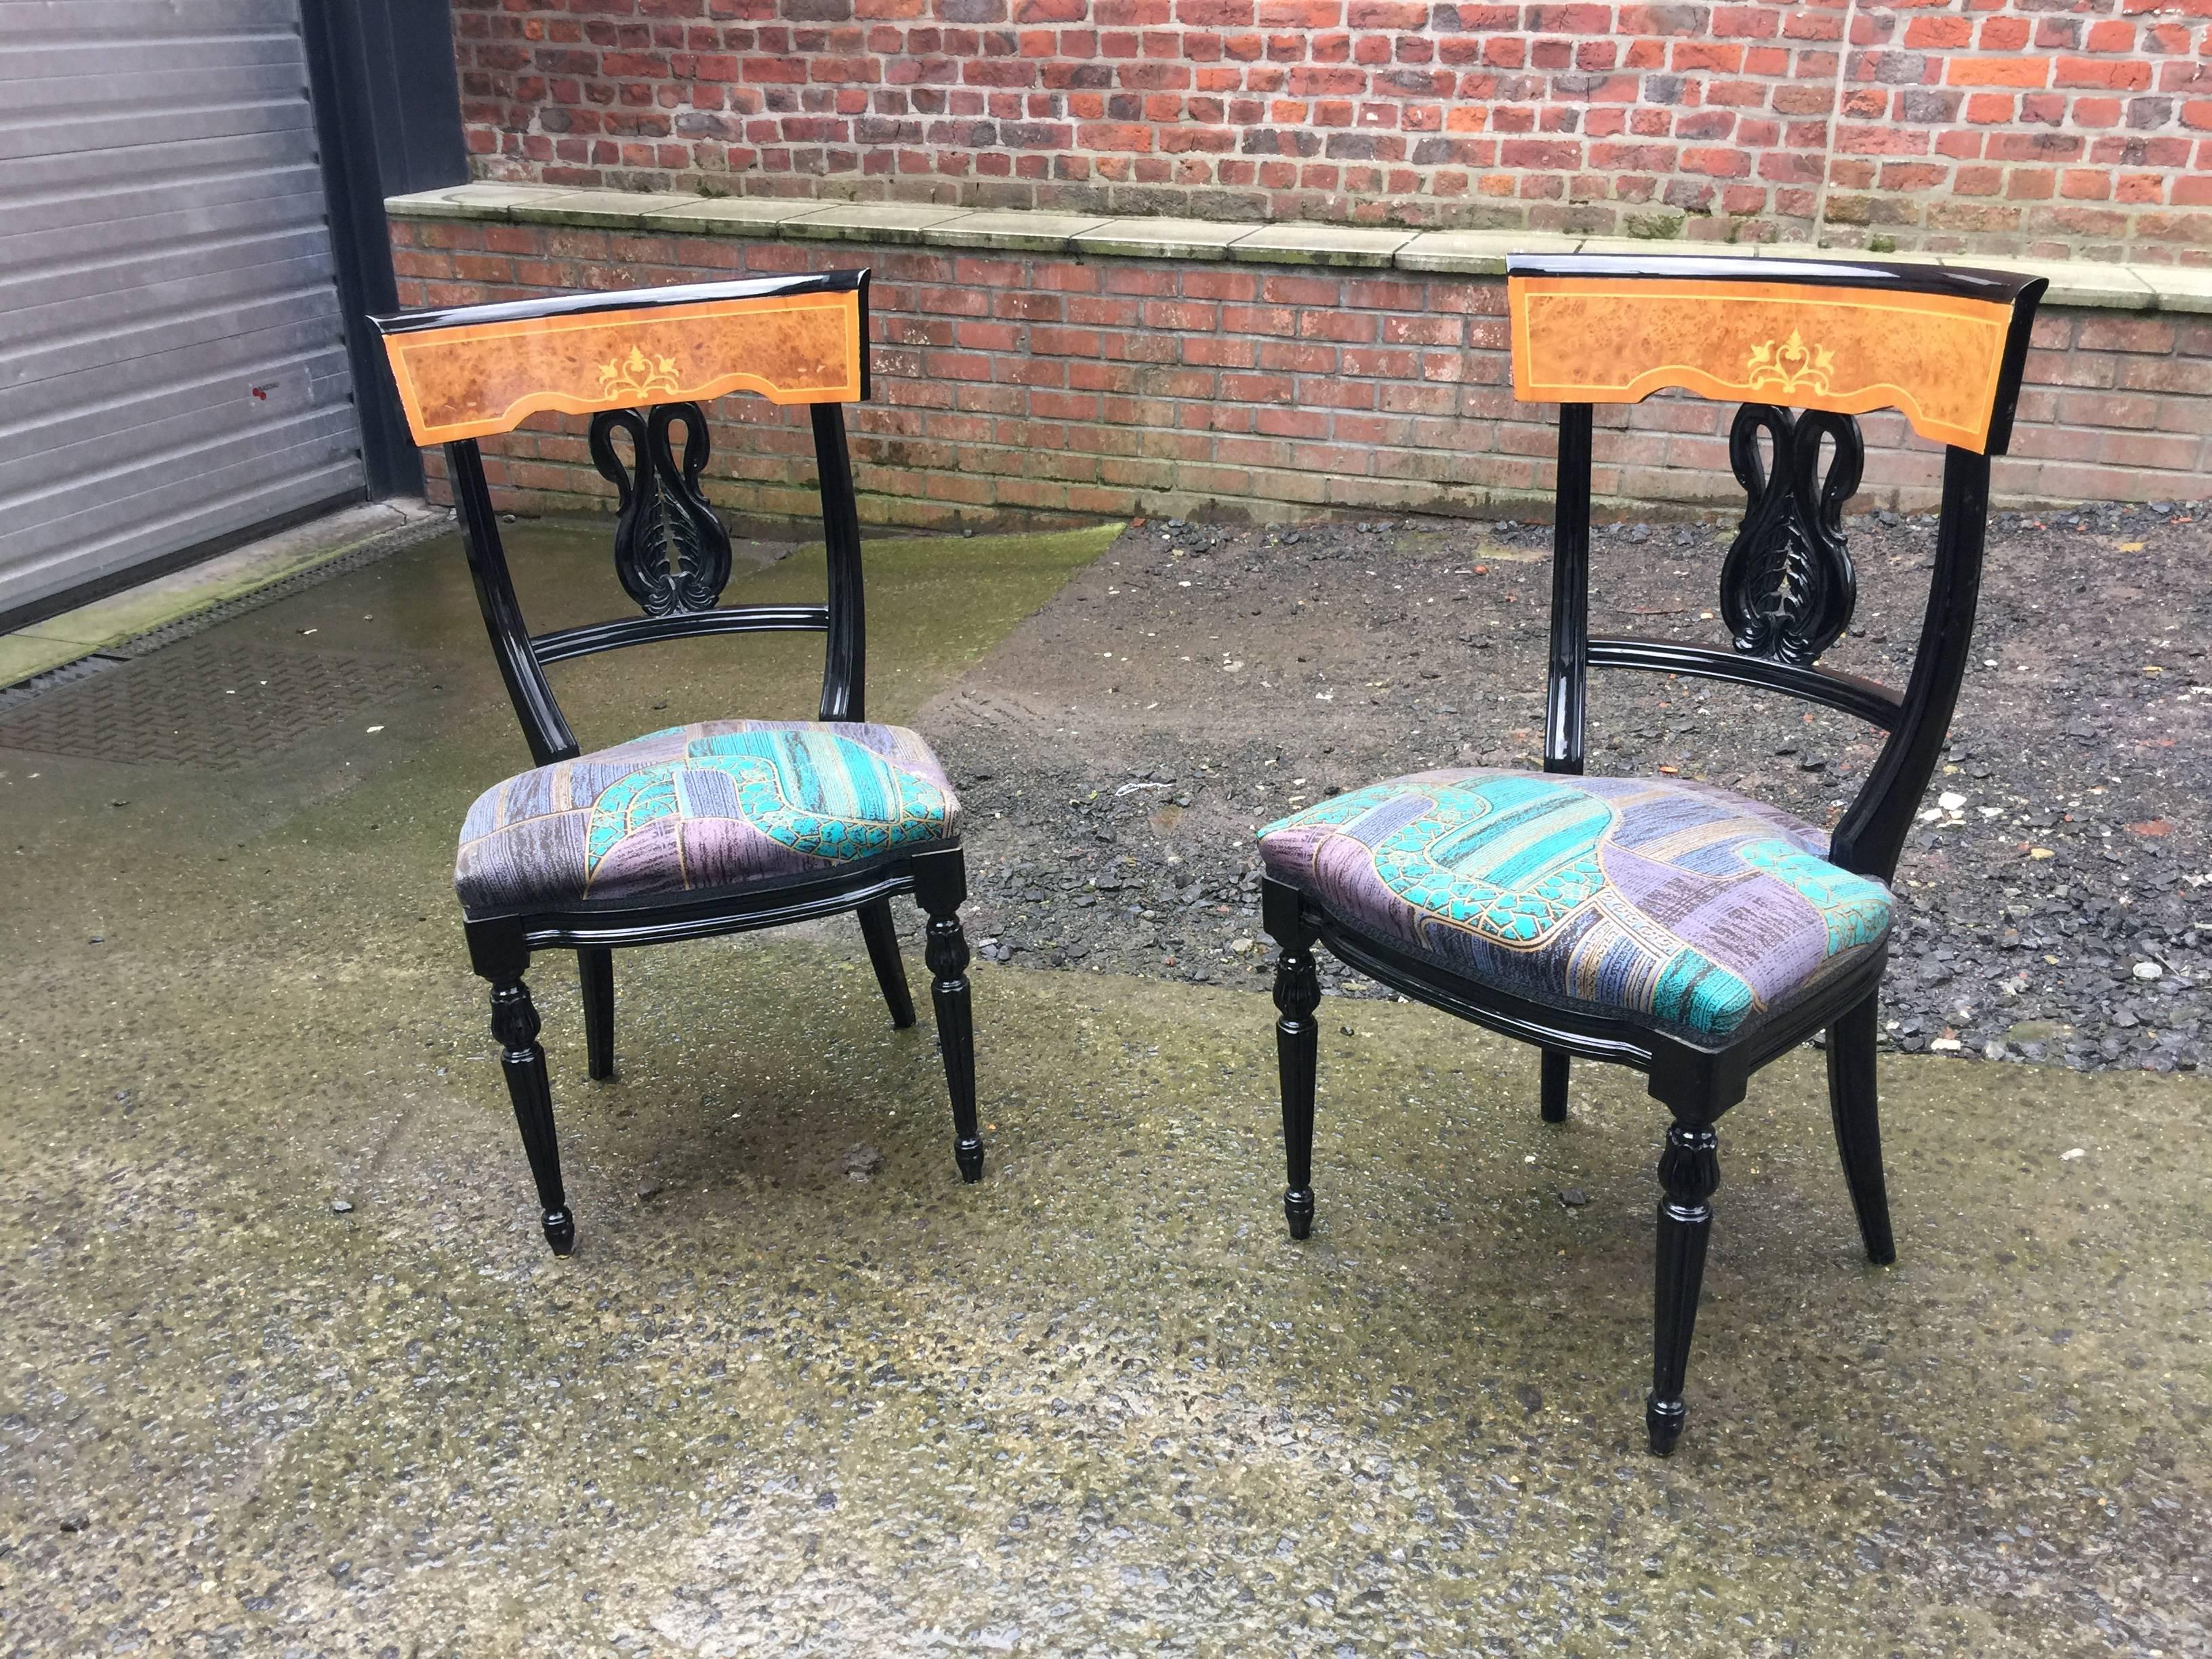 Six Neoclassical chairs circa 1970
2 armchairs same model also available.